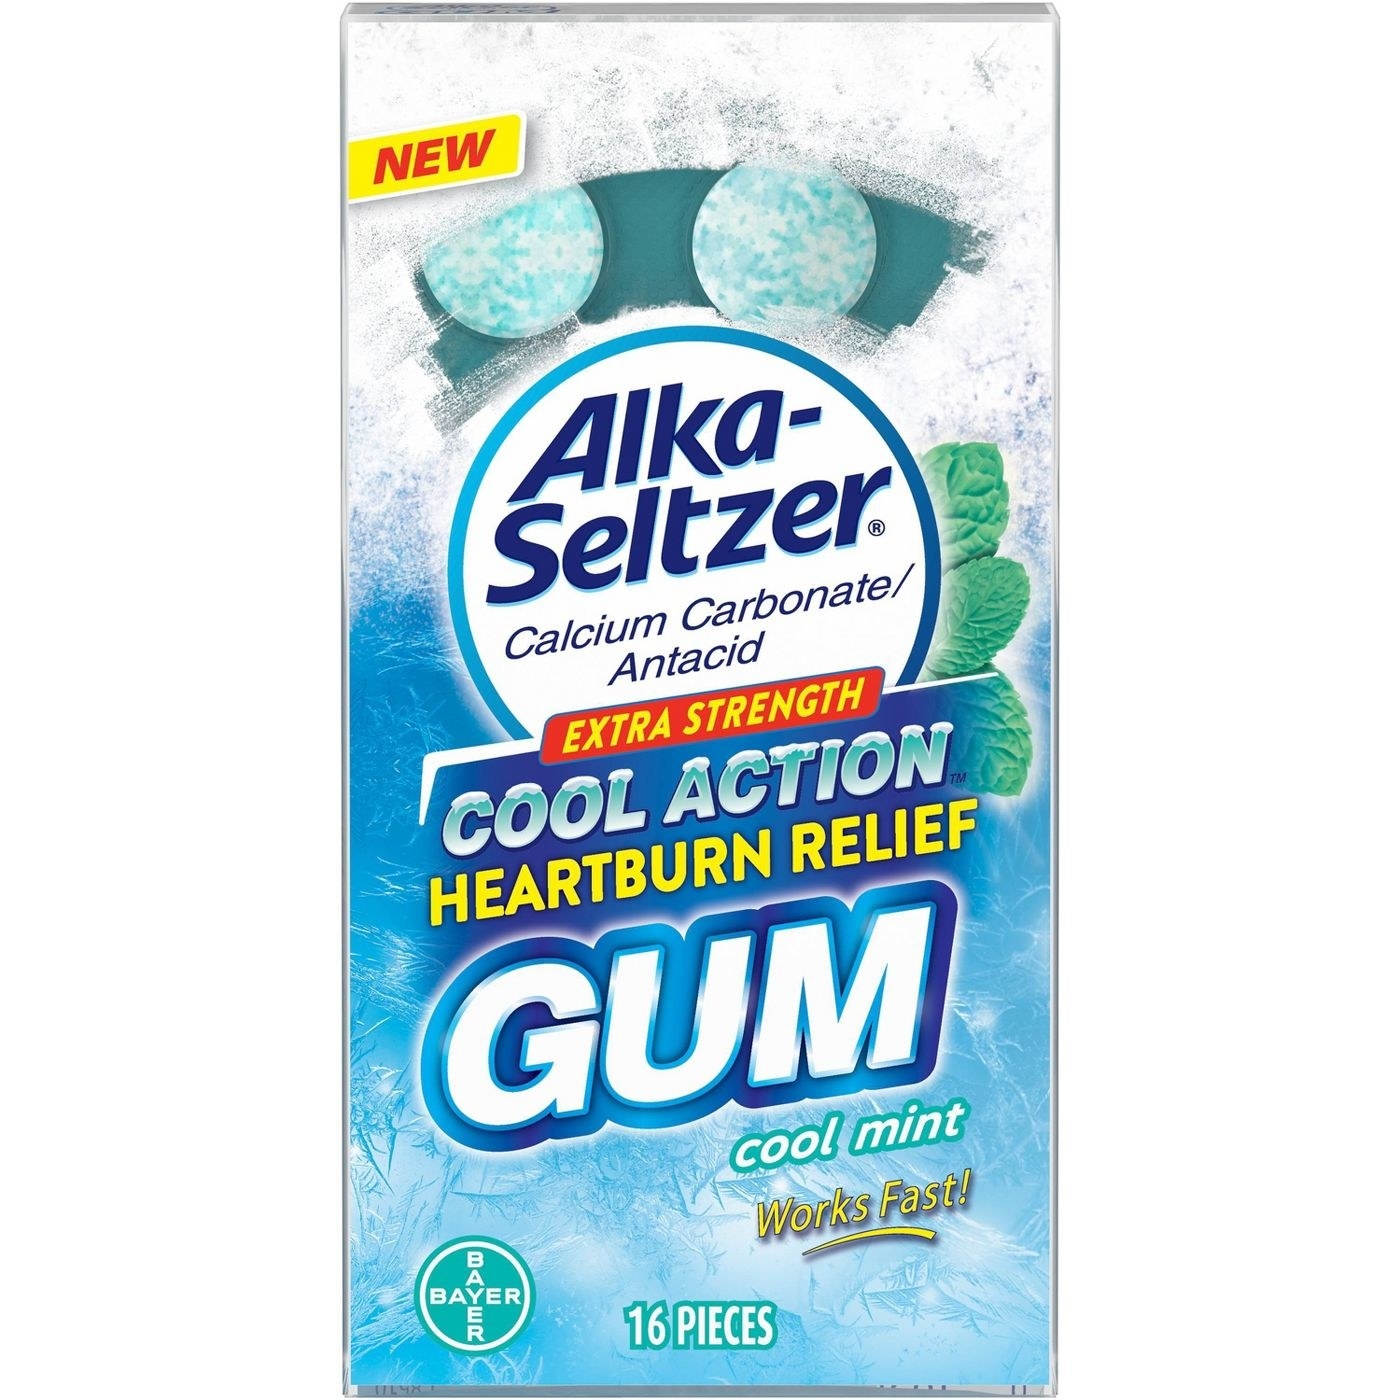 Blue and green plastic packaging for Alka-Seltzer gum